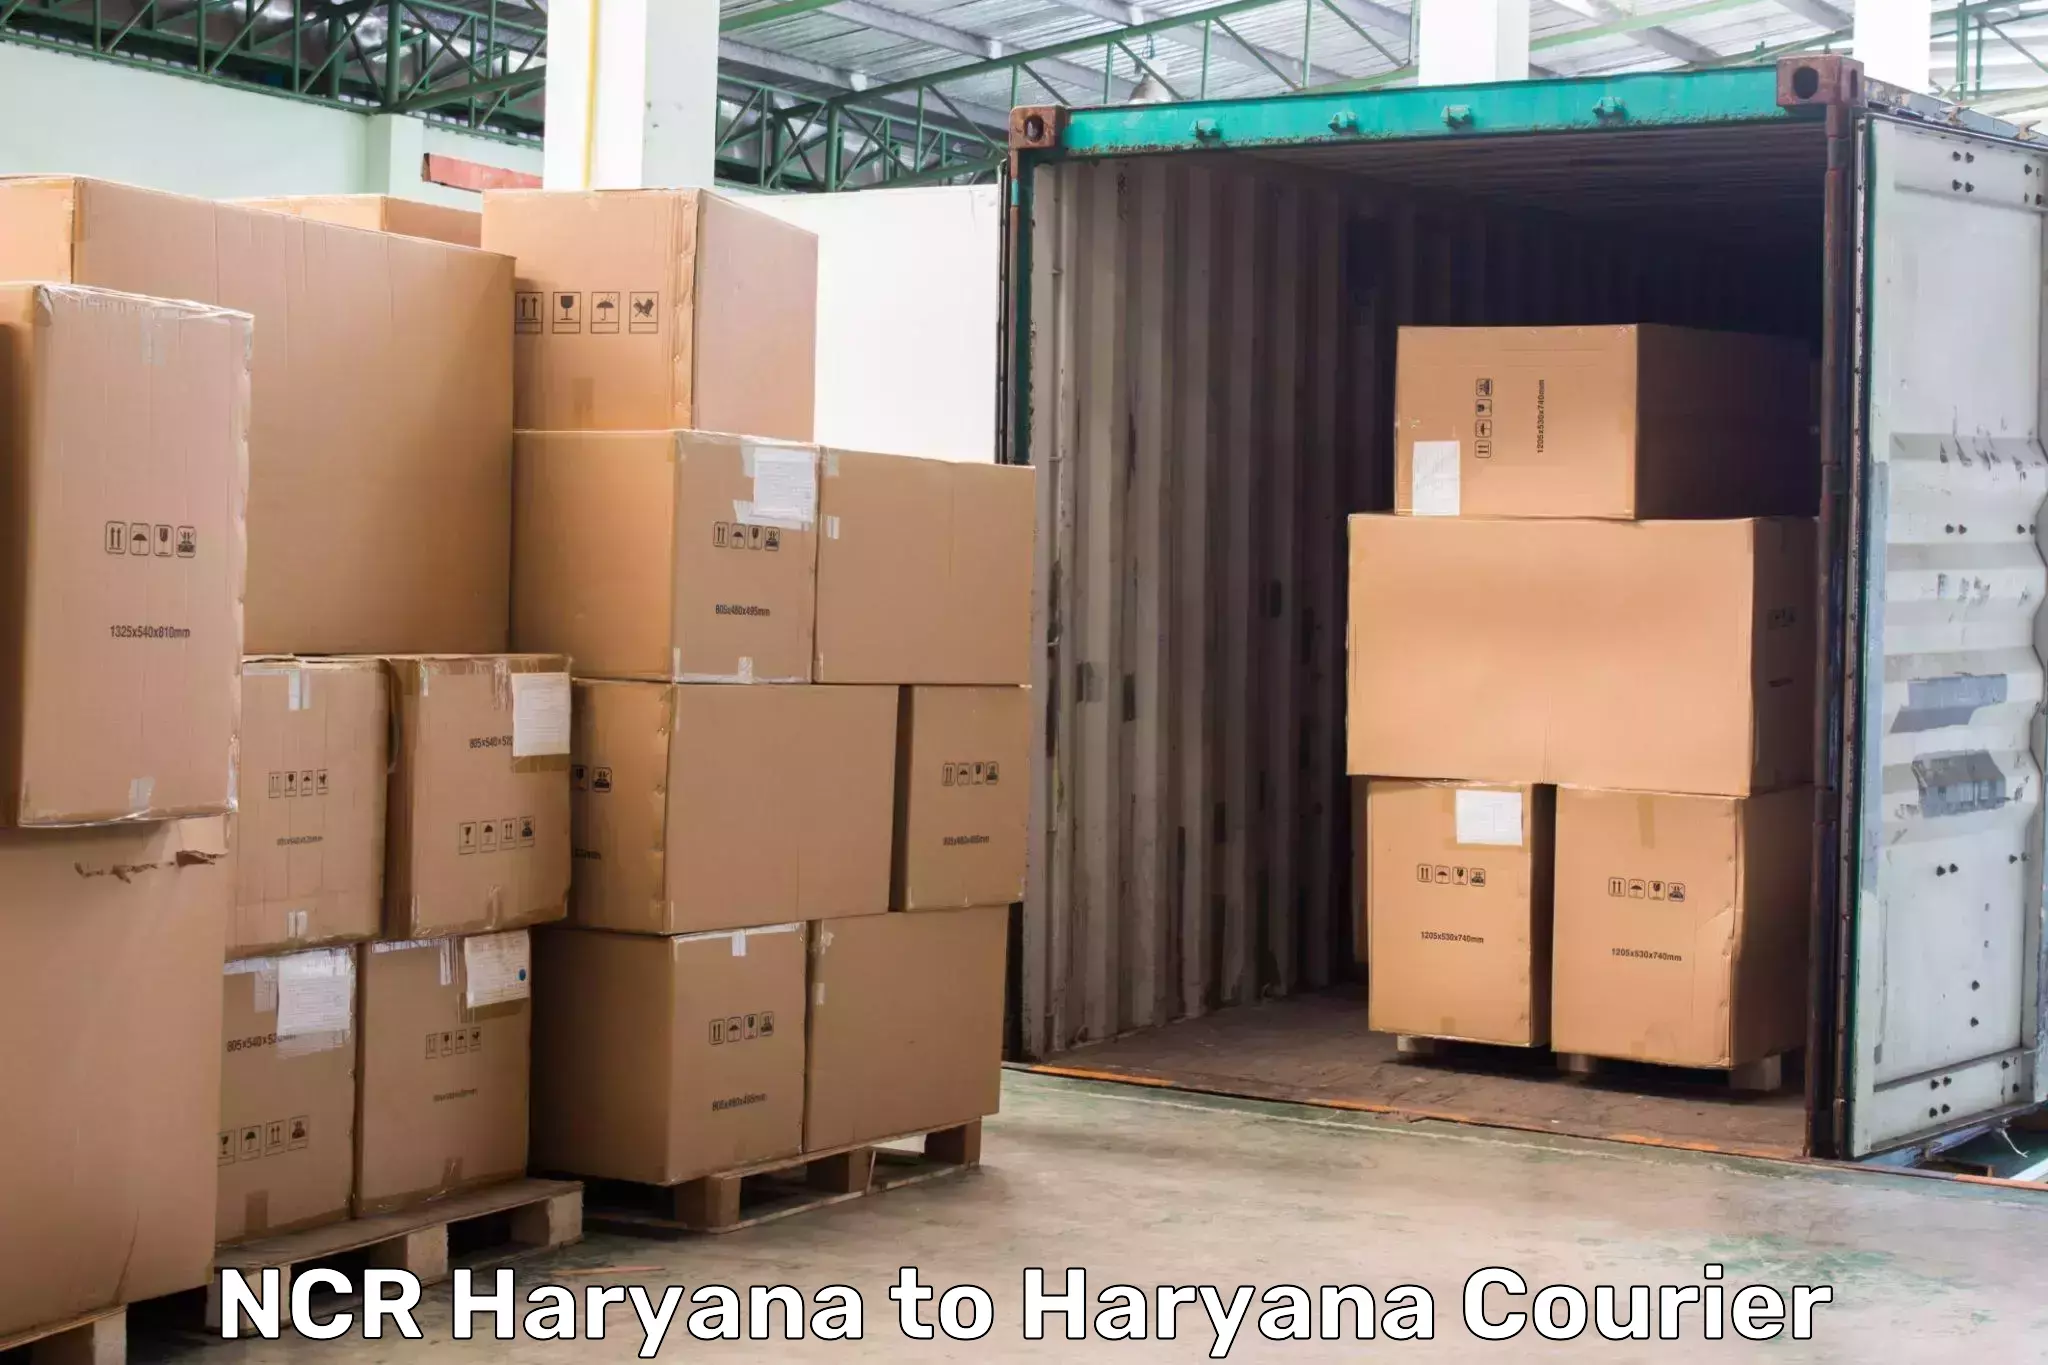 Courier service booking NCR Haryana to Gurugram